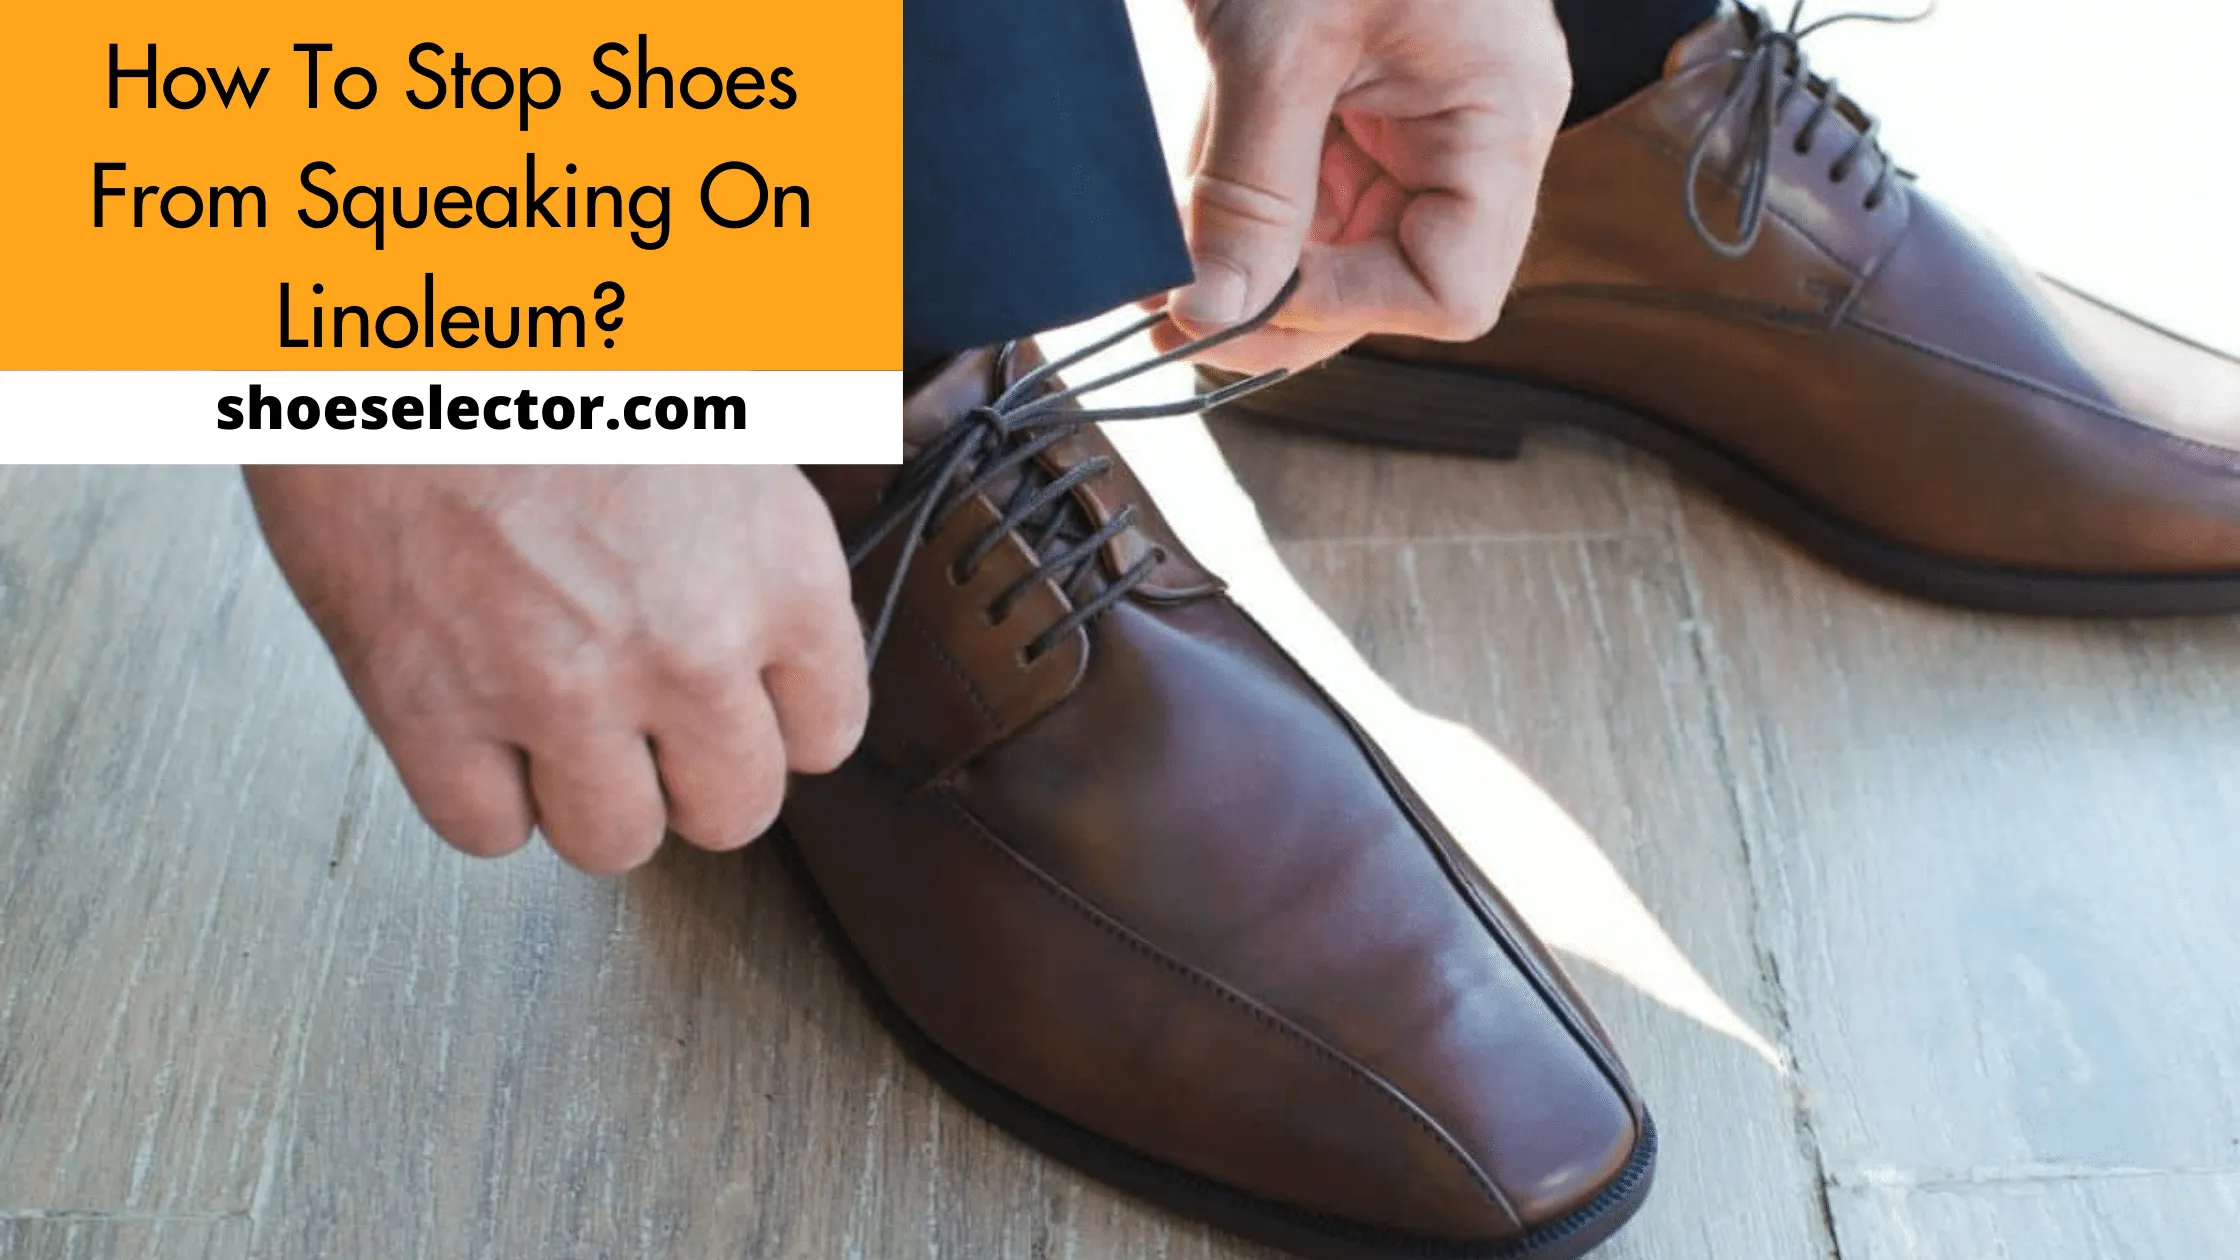 How To Stop Shoes From Squeaking On Linoleum? - Easy Guide